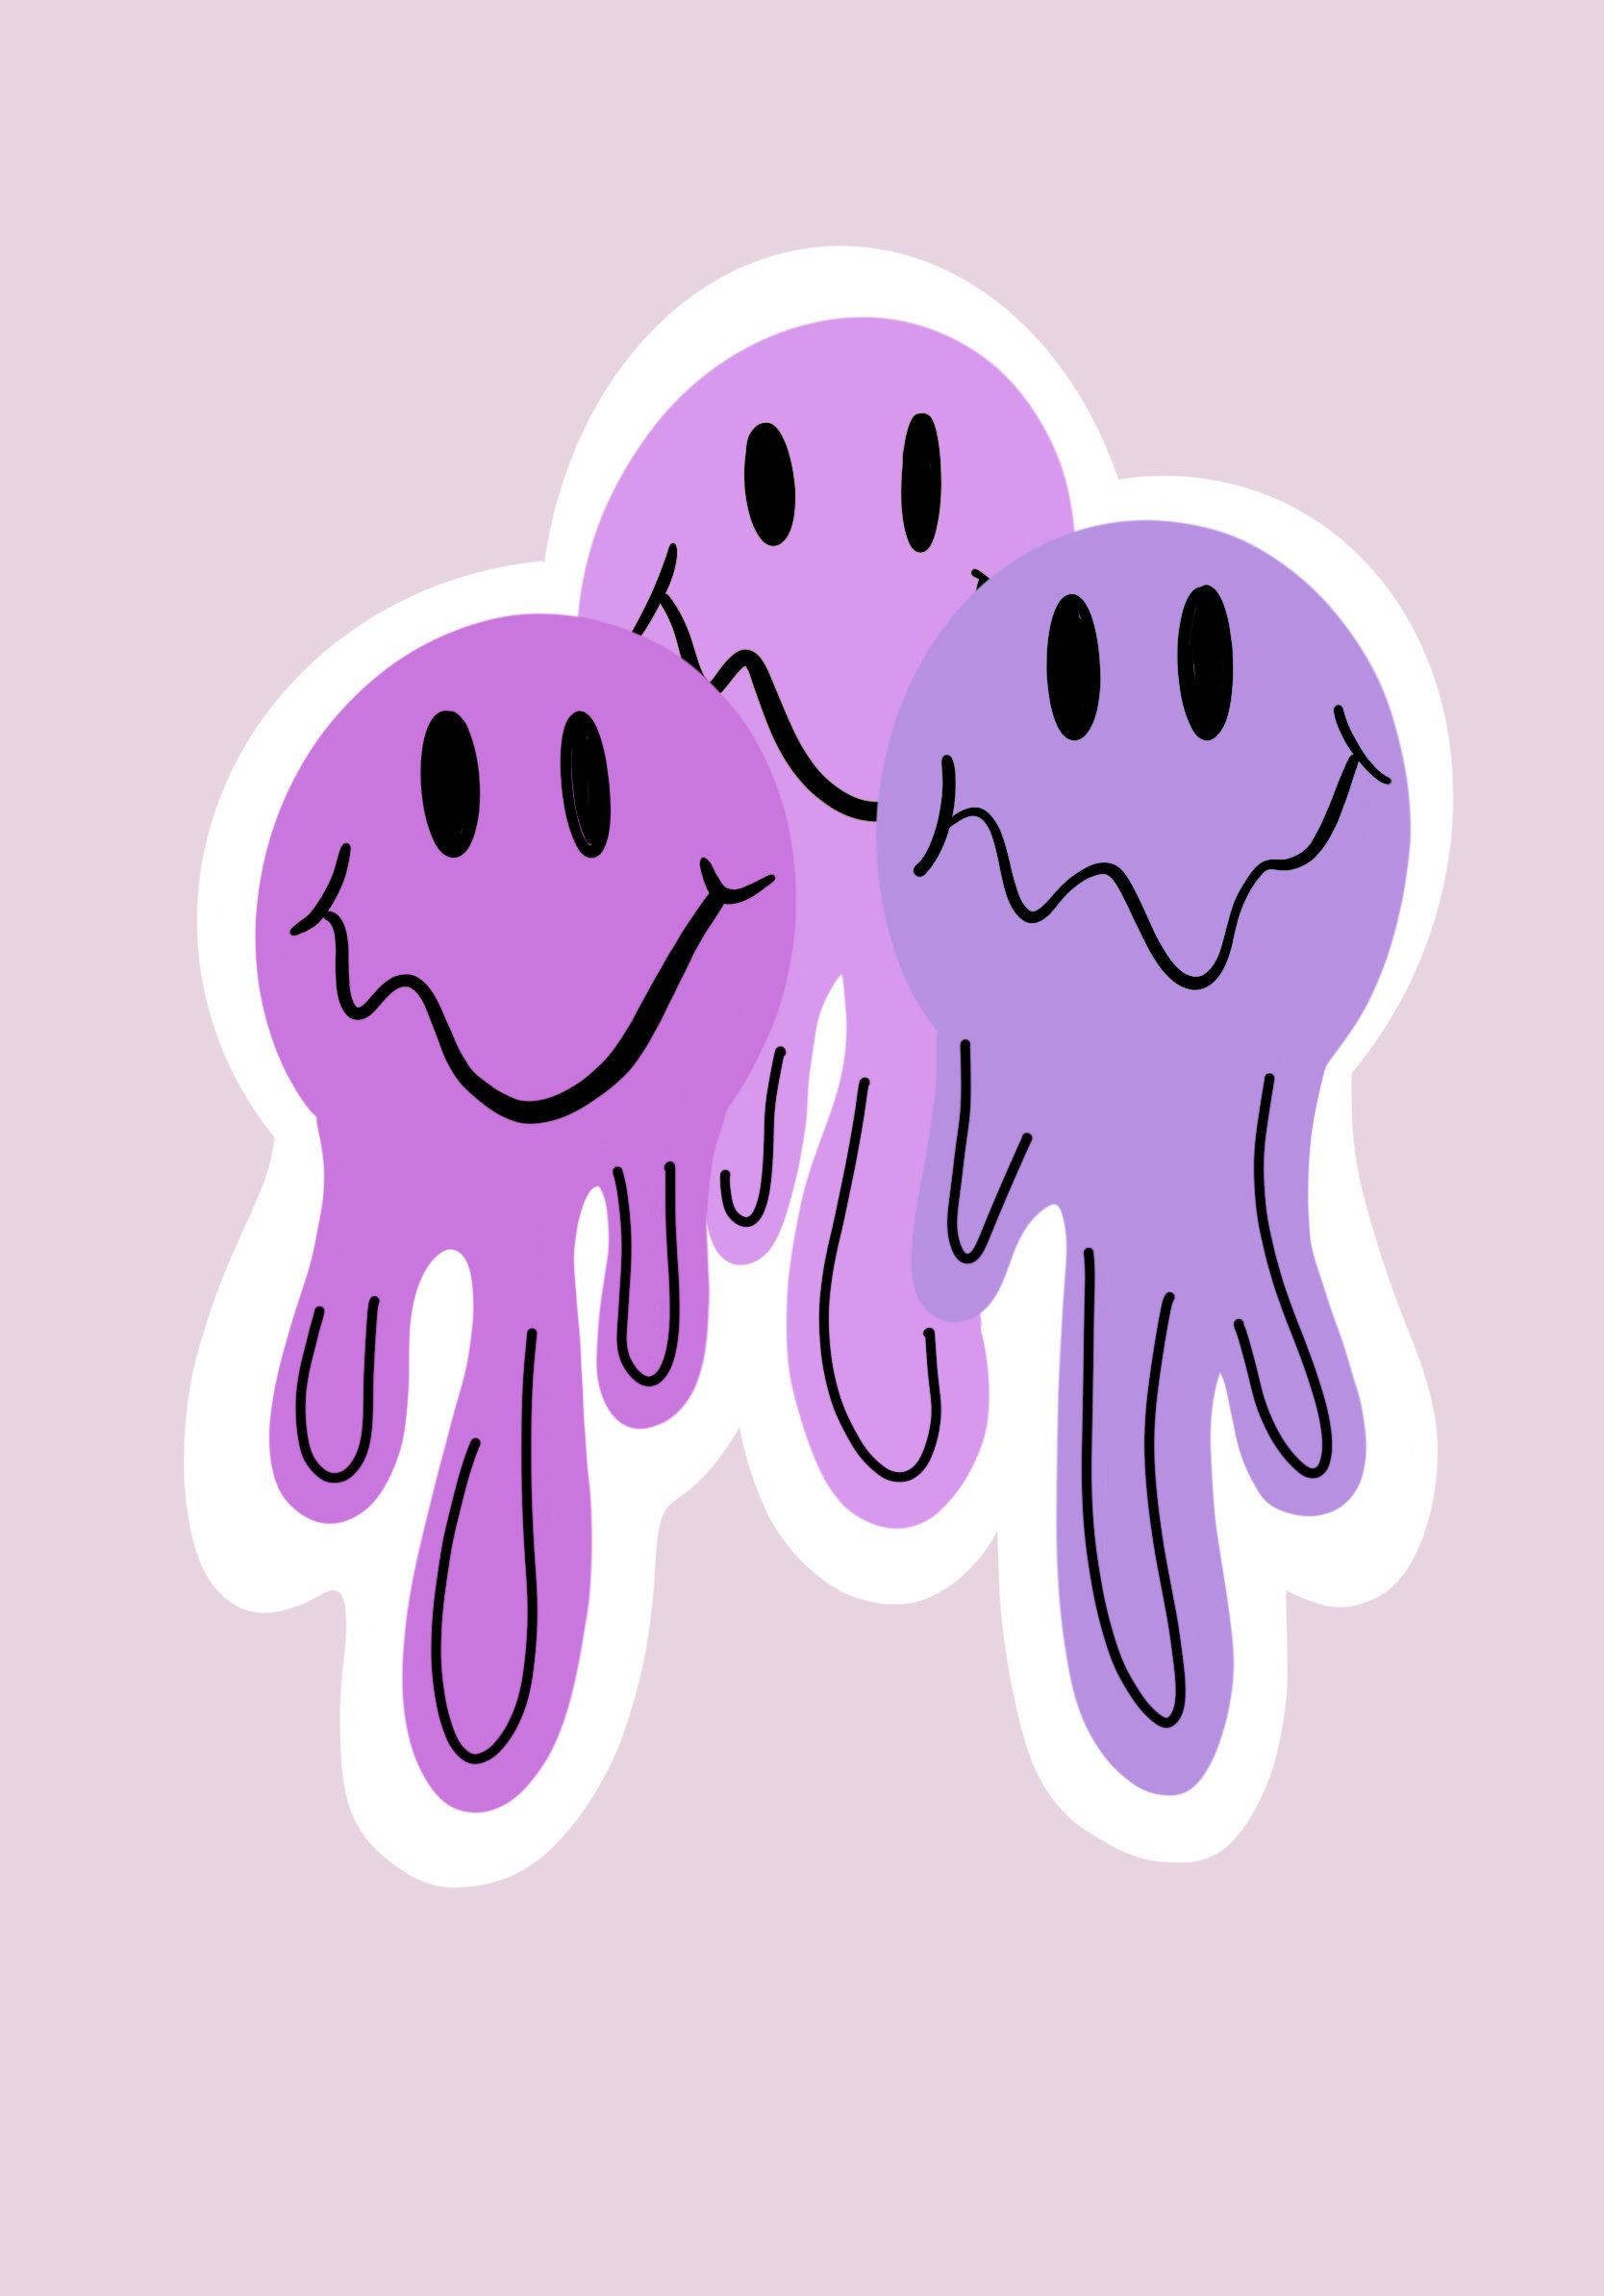 Download Preppy Smiley Face Dripping Violets Wallpaper